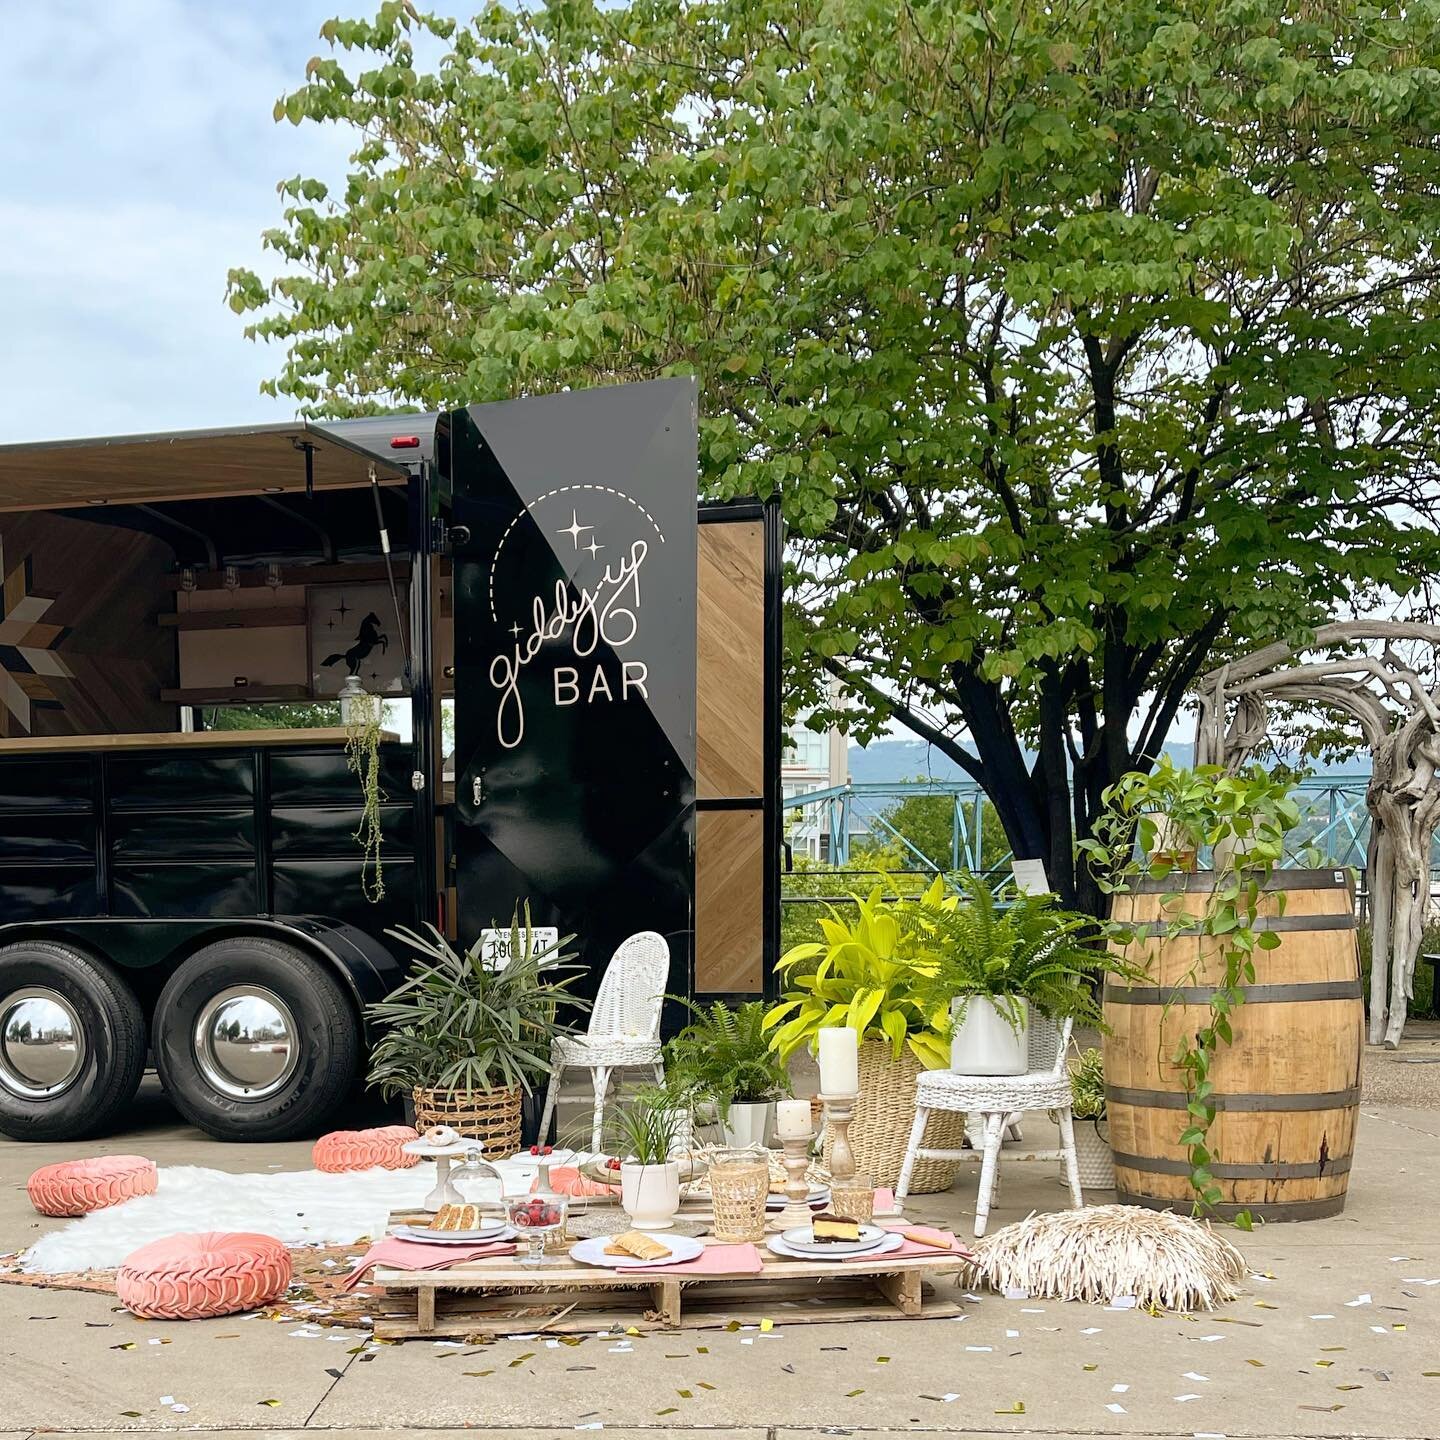 We created the prettiest styled shoot today. We&rsquo;re just plain giddy about it. Introducing our incredible, Black Beauty. She rides like a dream. Her upscale mobile beverage service is ready to roll to your event, big or small. 🐎 
CEO: Matt Sear